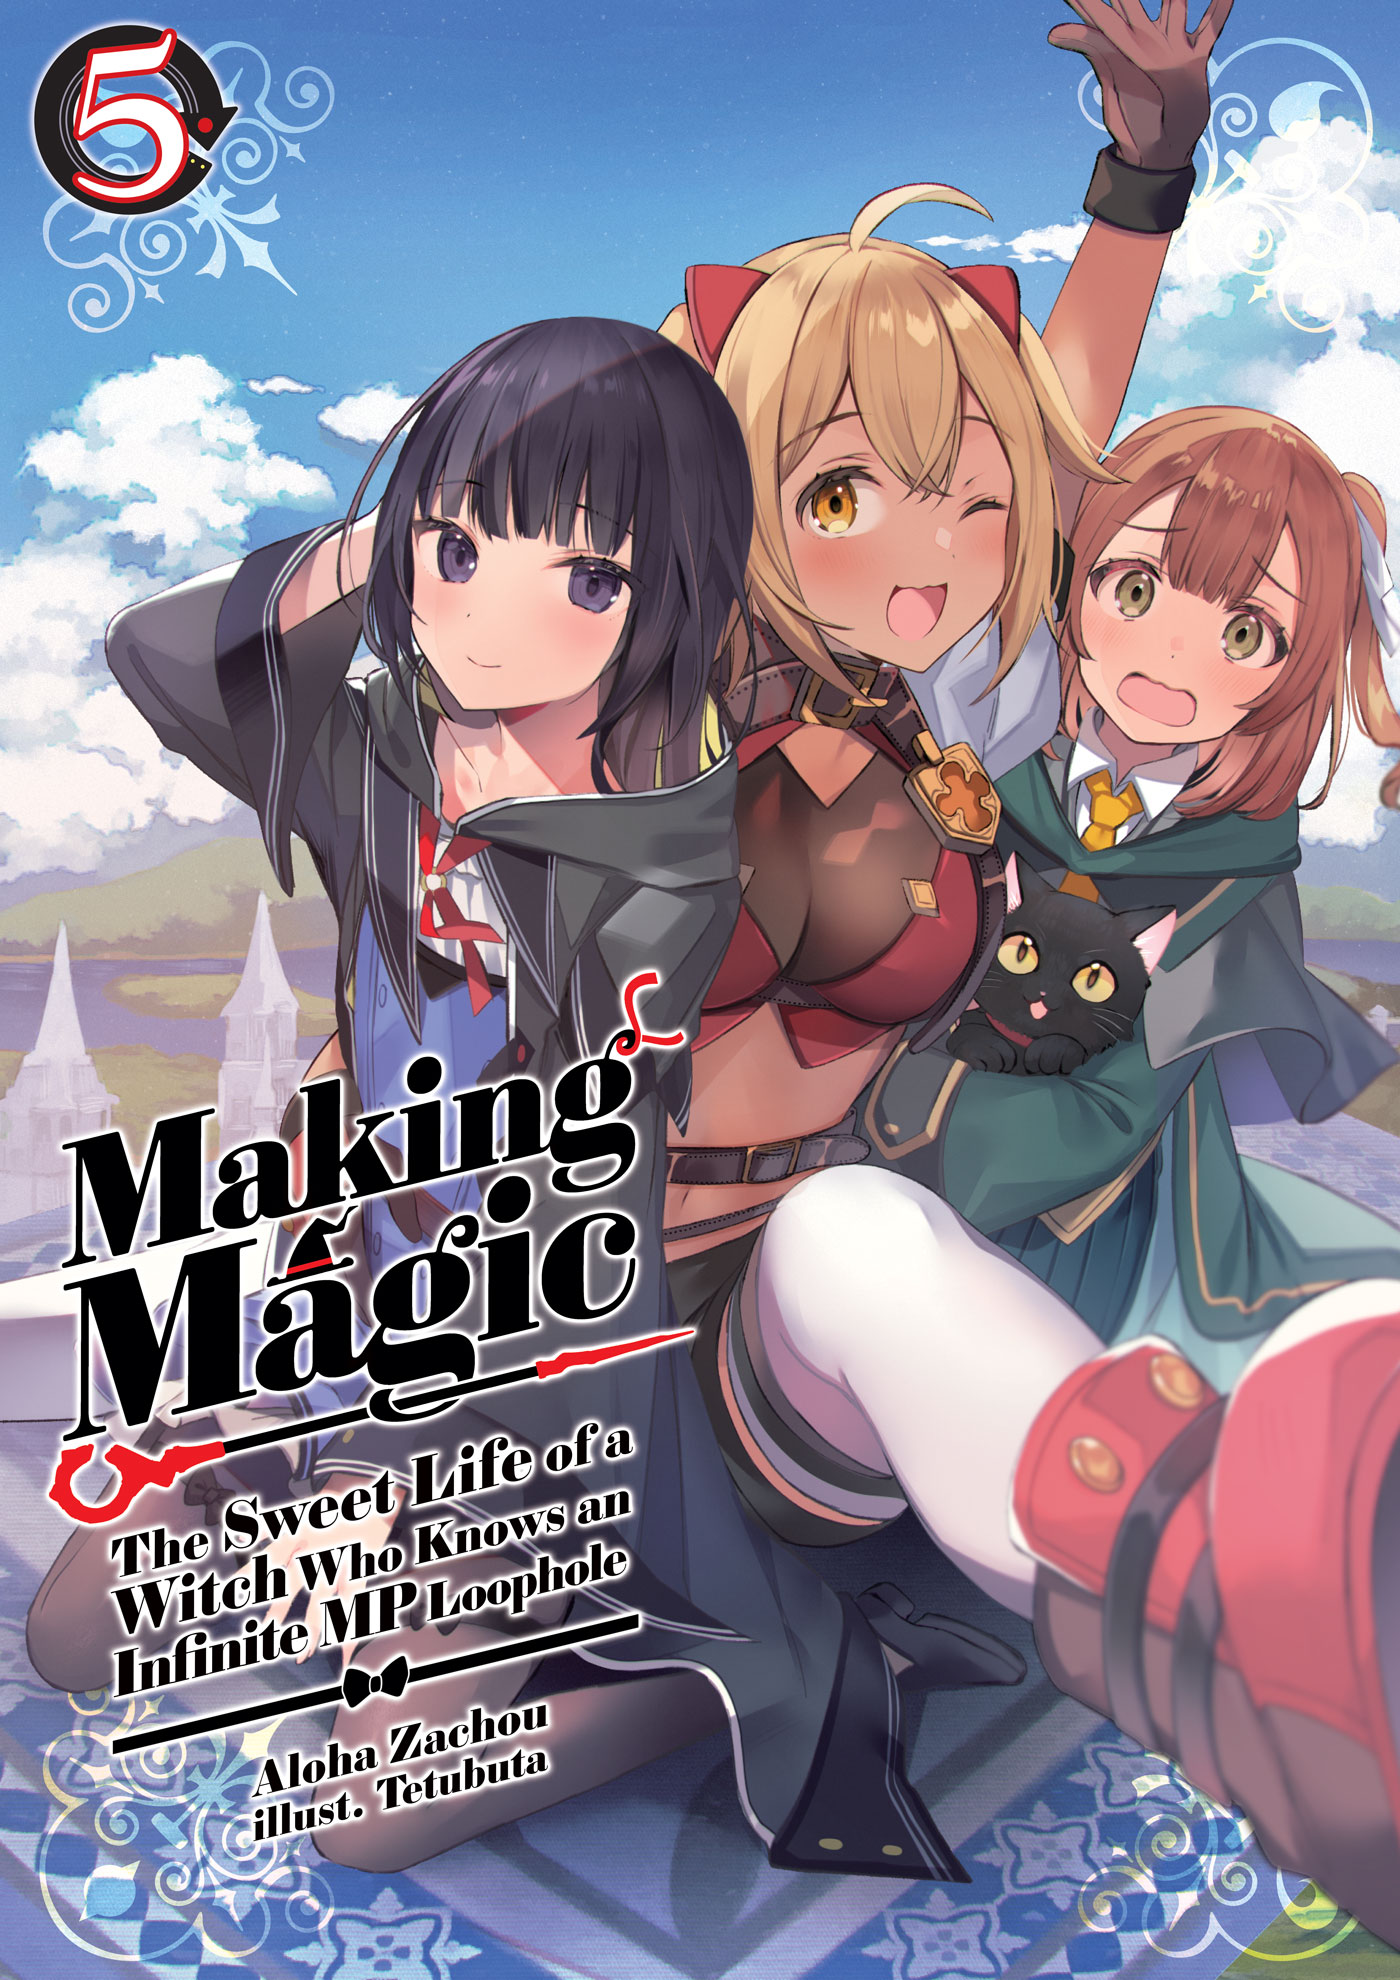 Making Magic: The Sweet Life of a Witch Who Knows an Infinite MP Loophole #005